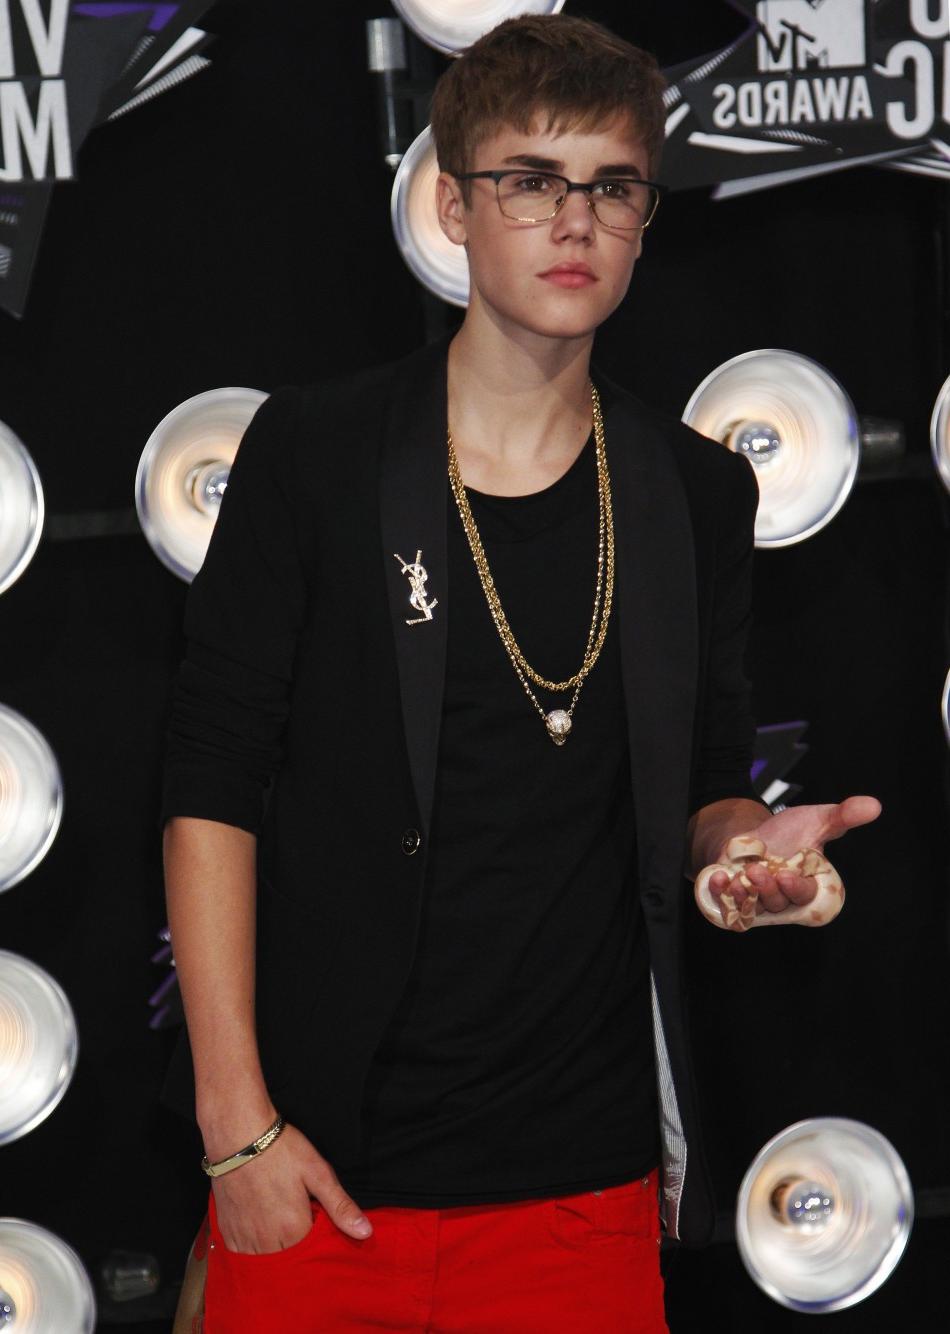 Bieber at the 2011